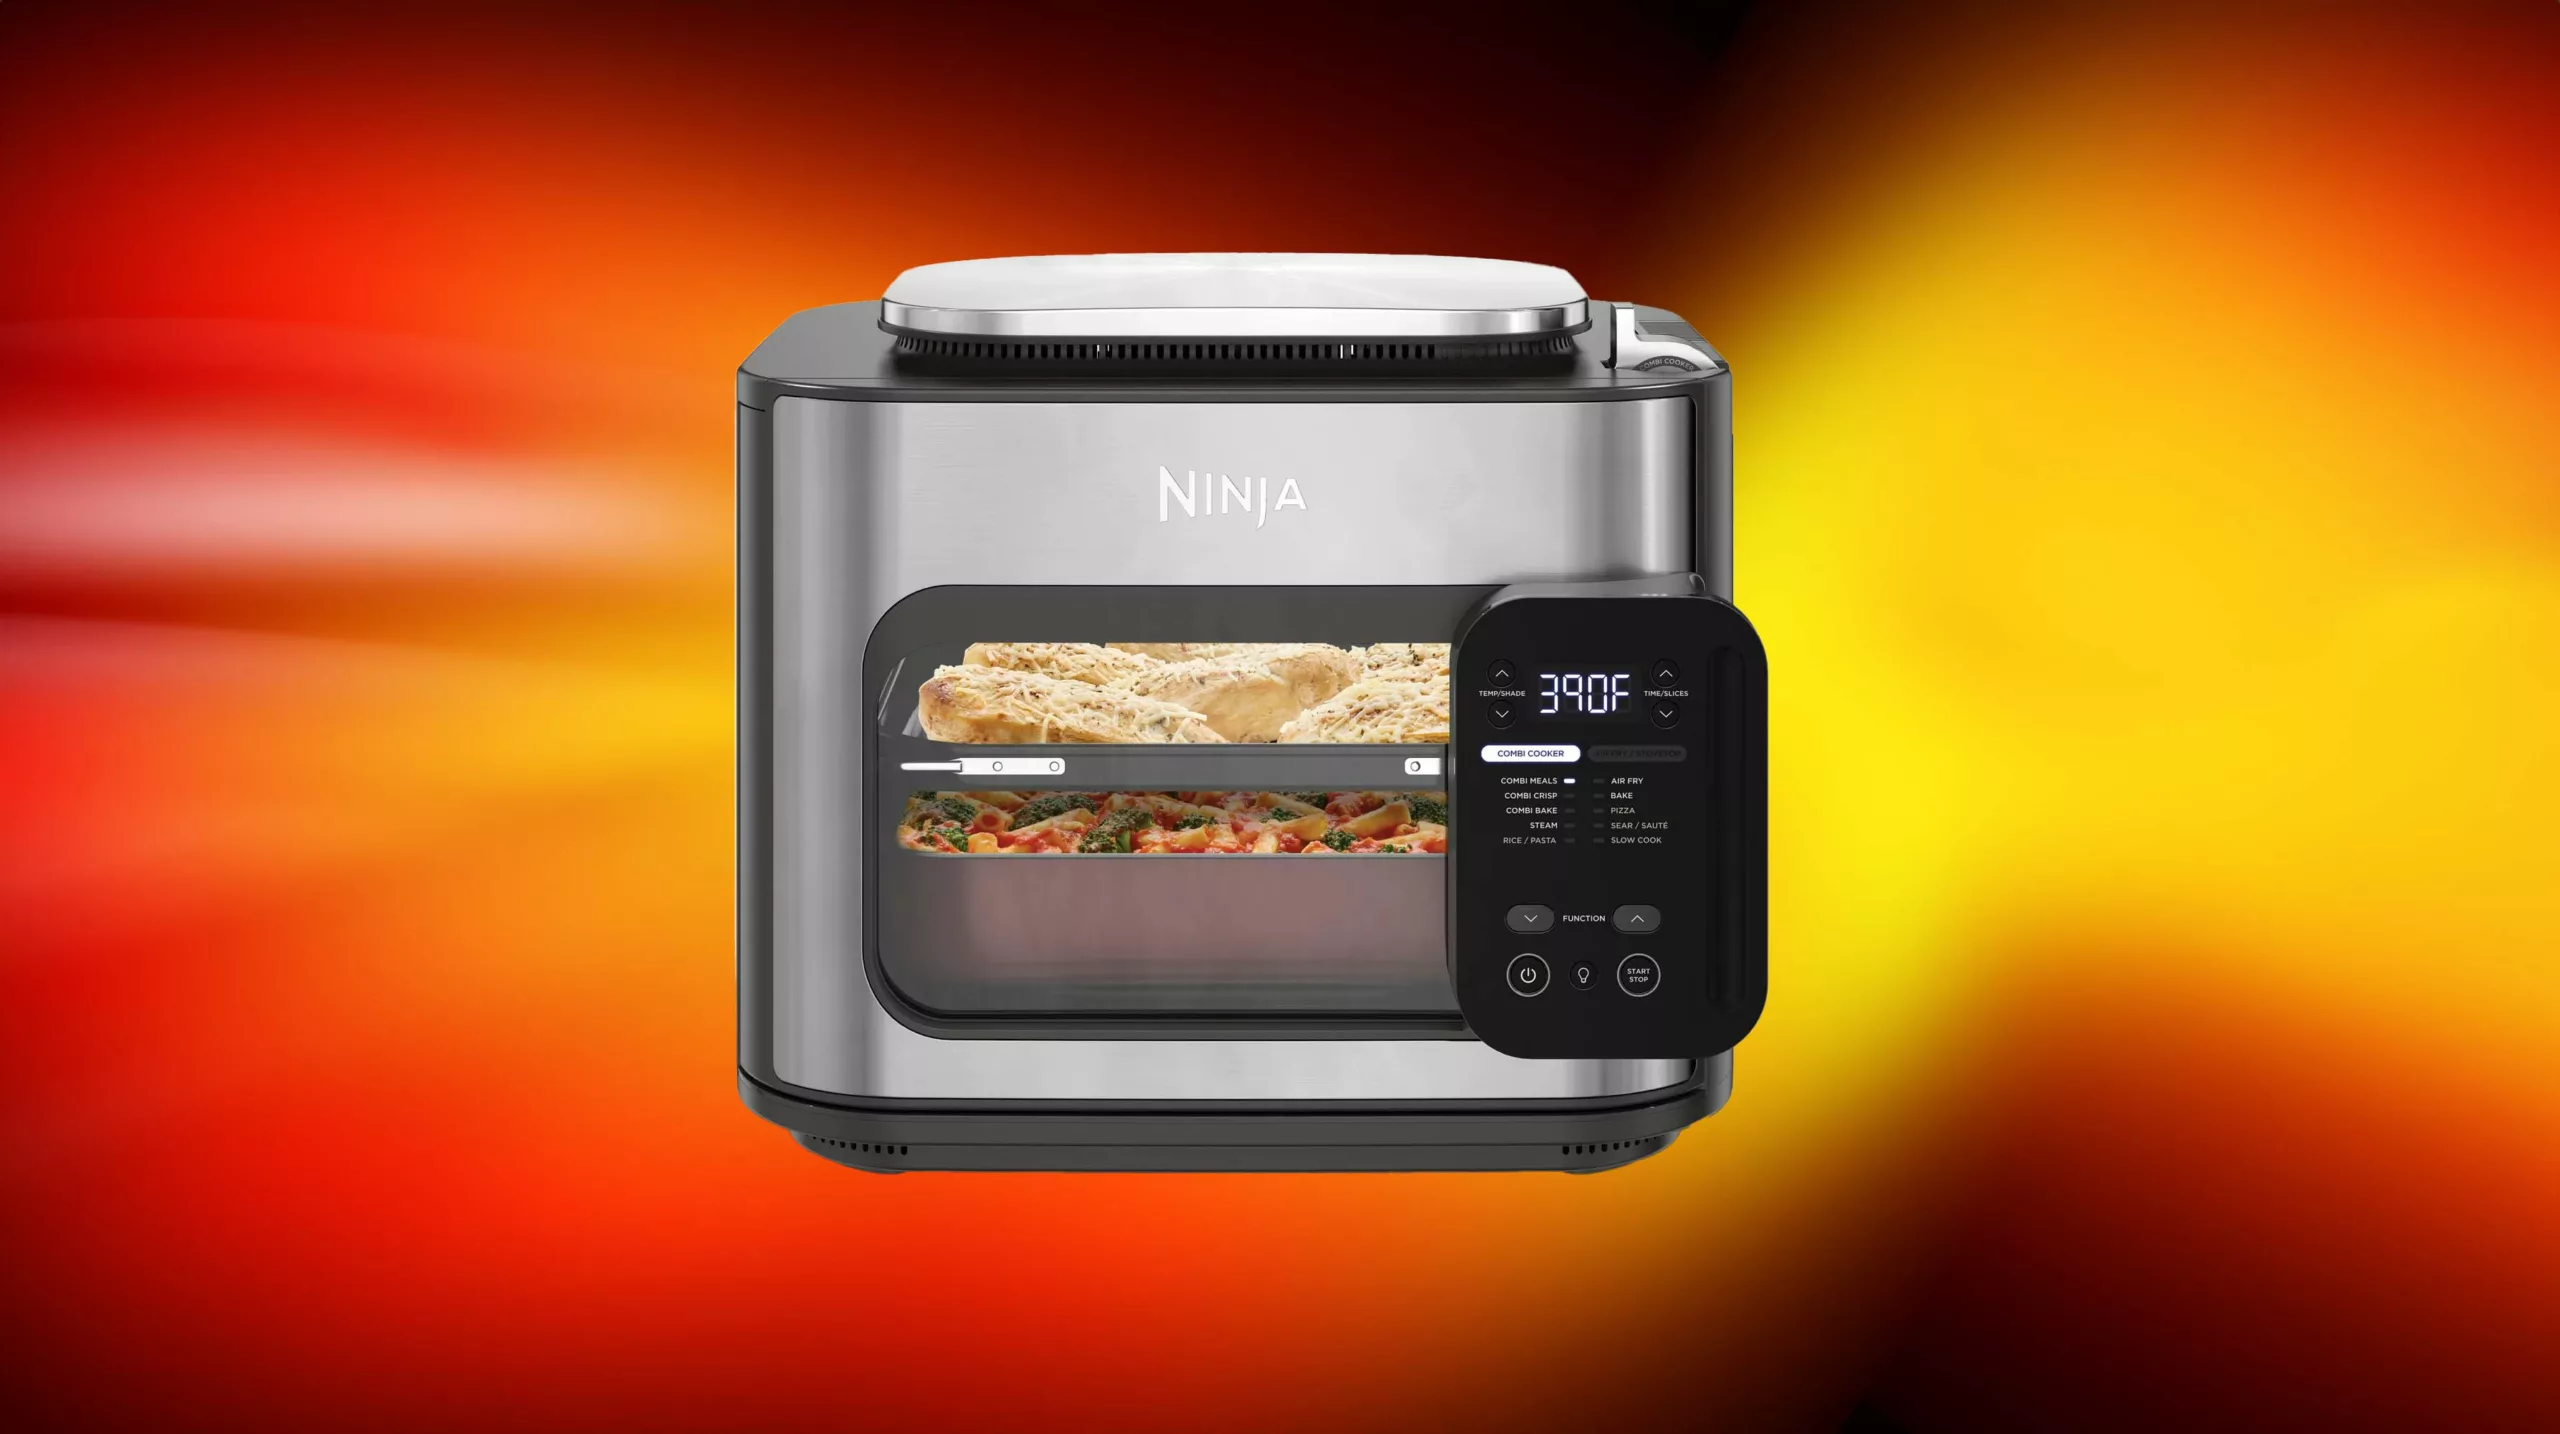 Ninja Combi All-In-One Multicooker, Oven & Air Fryer with Recipe Guide